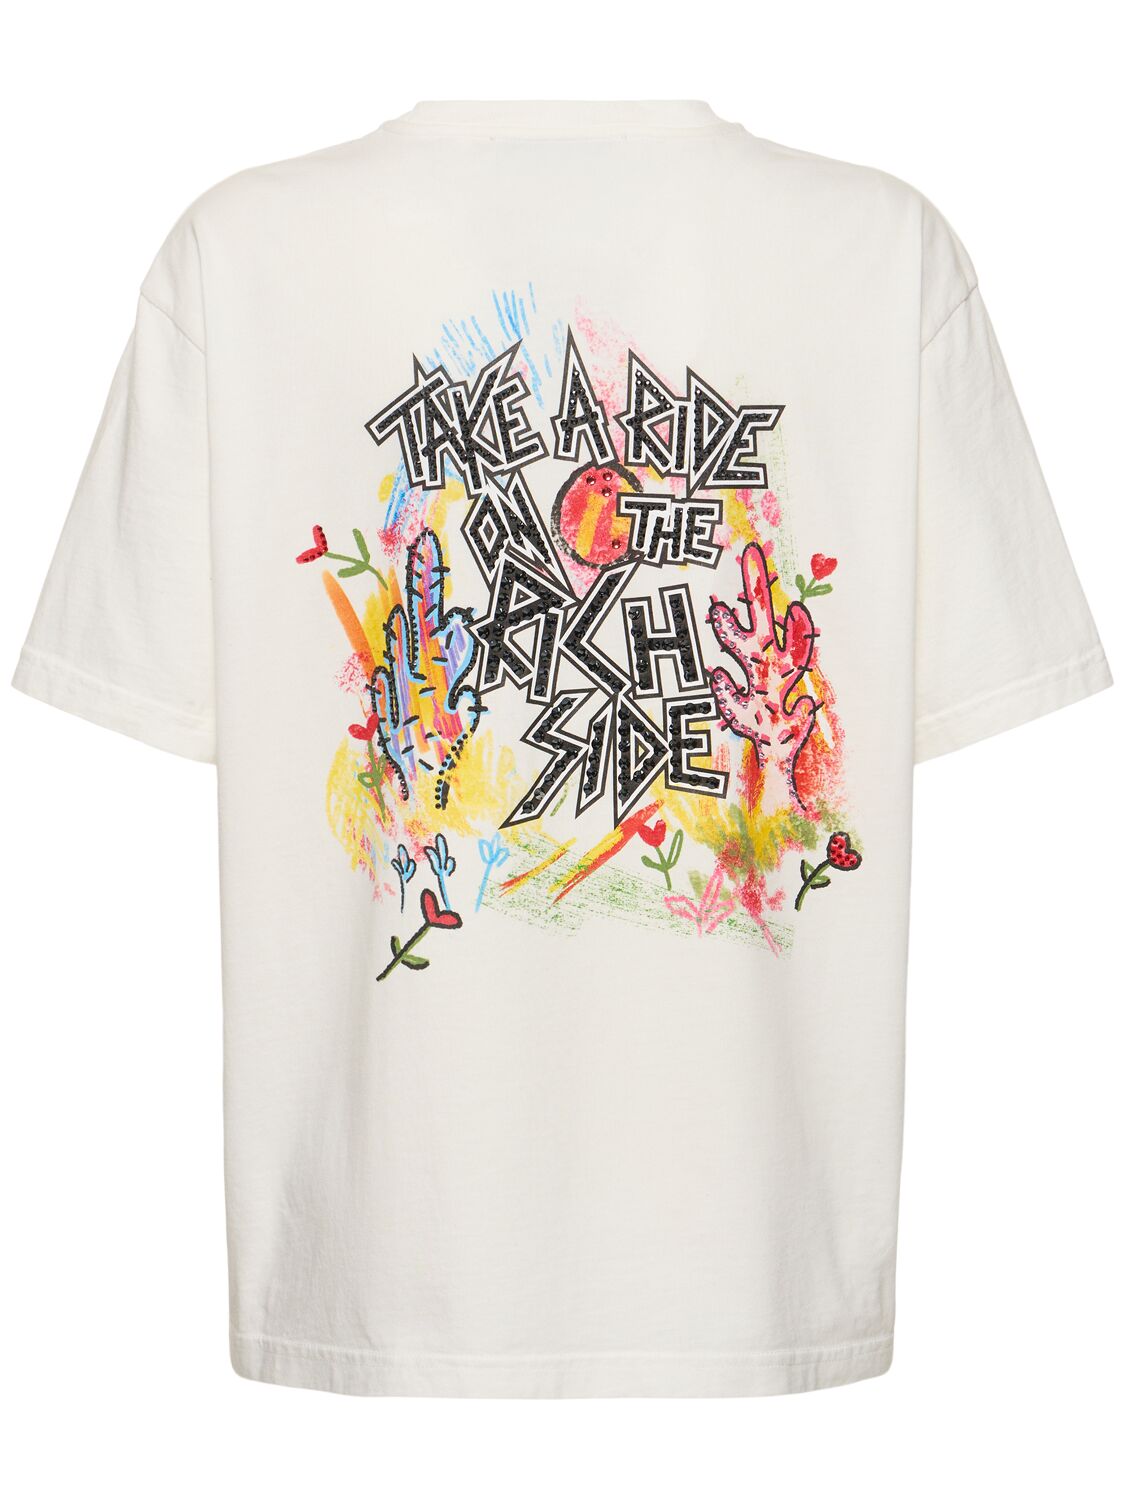 Shop Alessandra Rich Jersey Printed Short Sleeve T-shirt In White